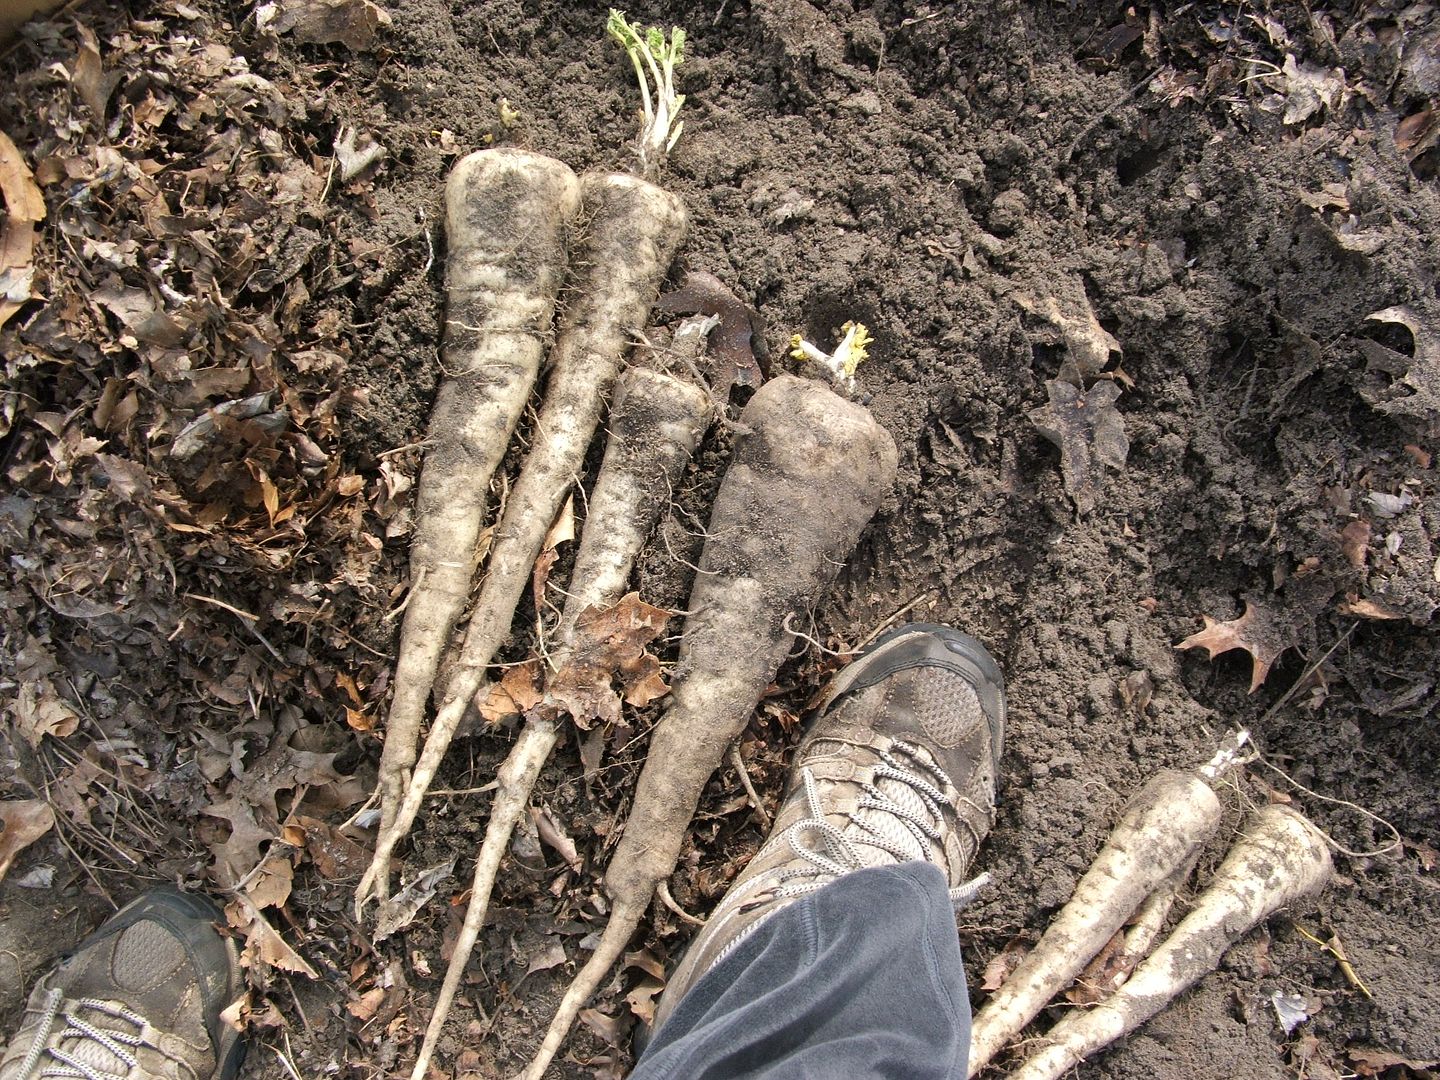 Larger Than Feet Parsnips by Angie Ouellette-Tower for godsgrowinggarden.com photo 011_zpsa04307c6.jpg